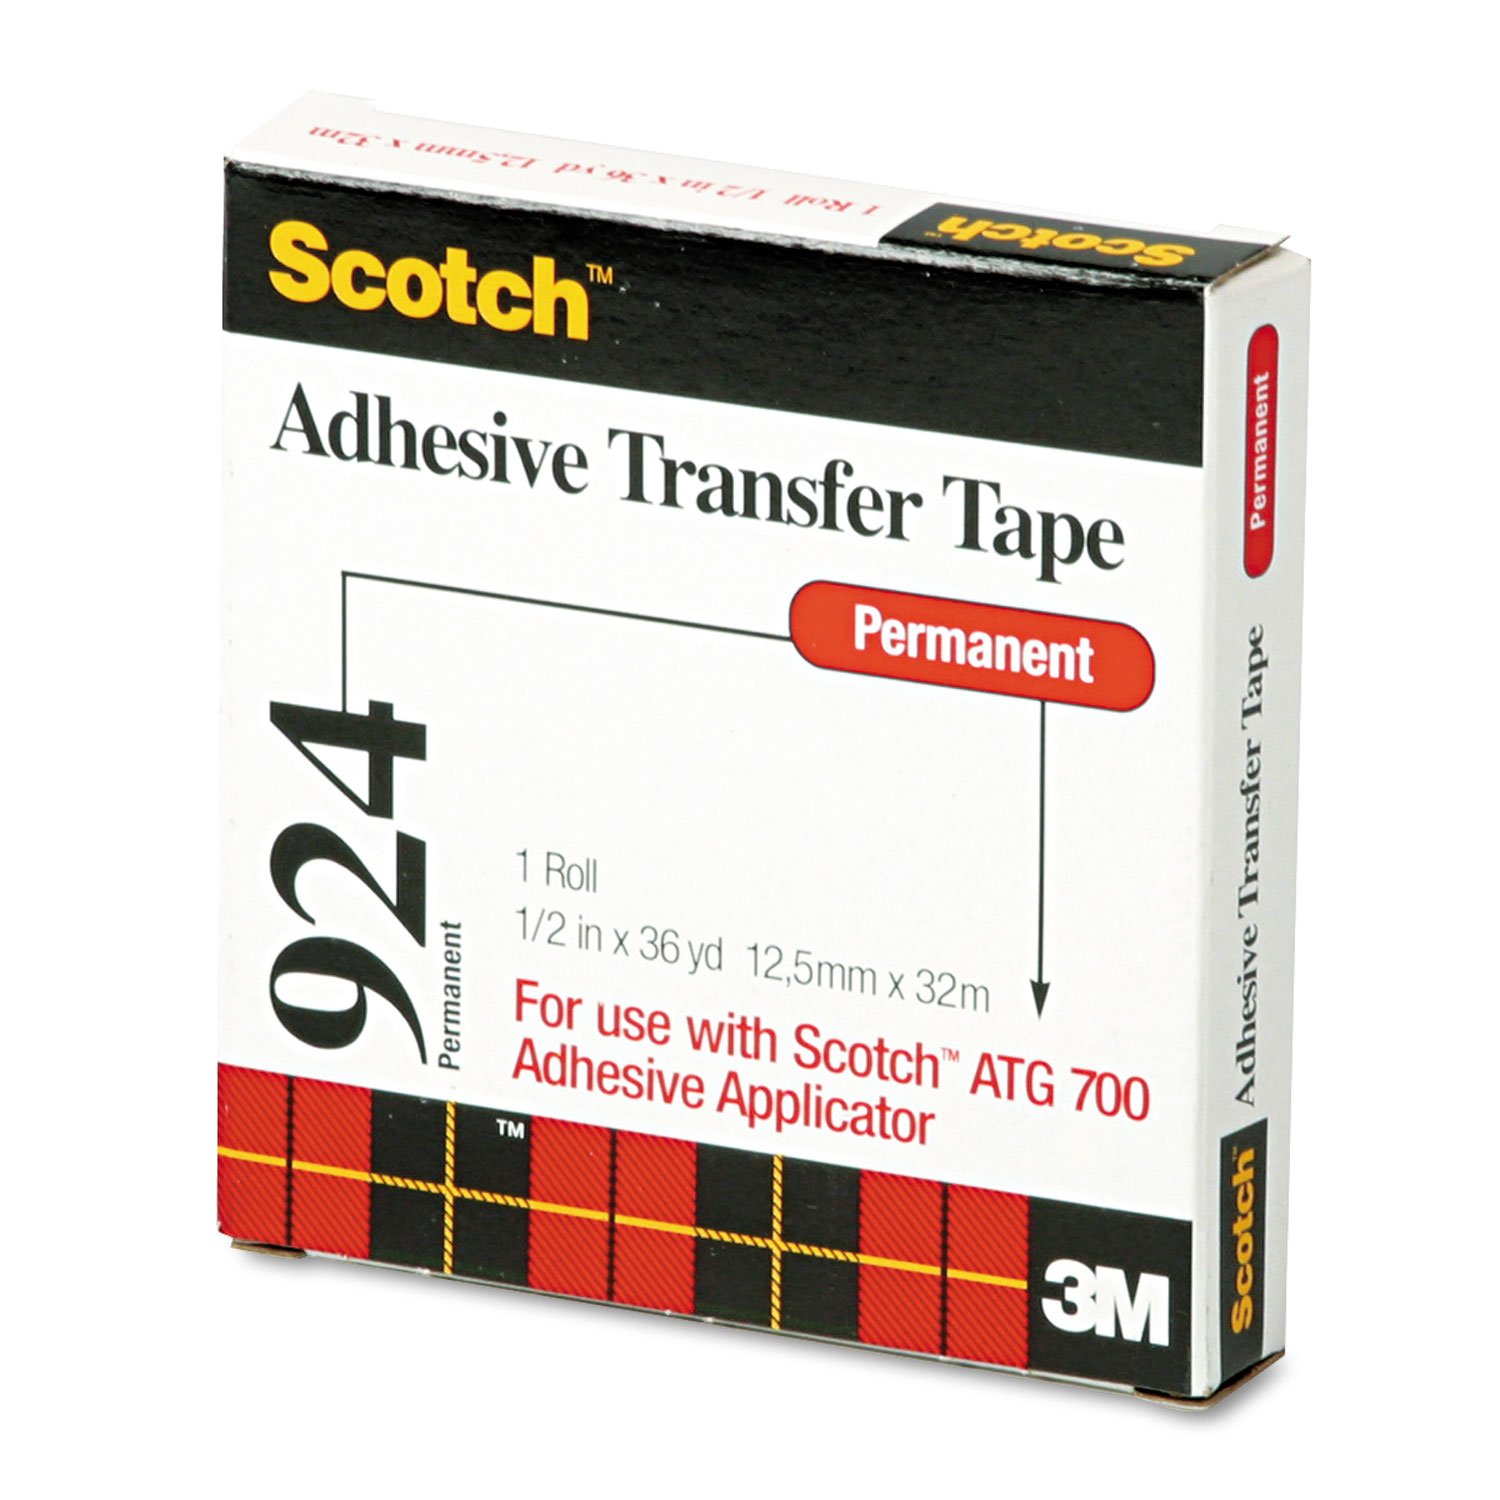 Scotch Atg Adhesive Transfer Tape, Permanent, Holds Up To 0.5 Lbs, 0.5" X 36 Yds, Clear